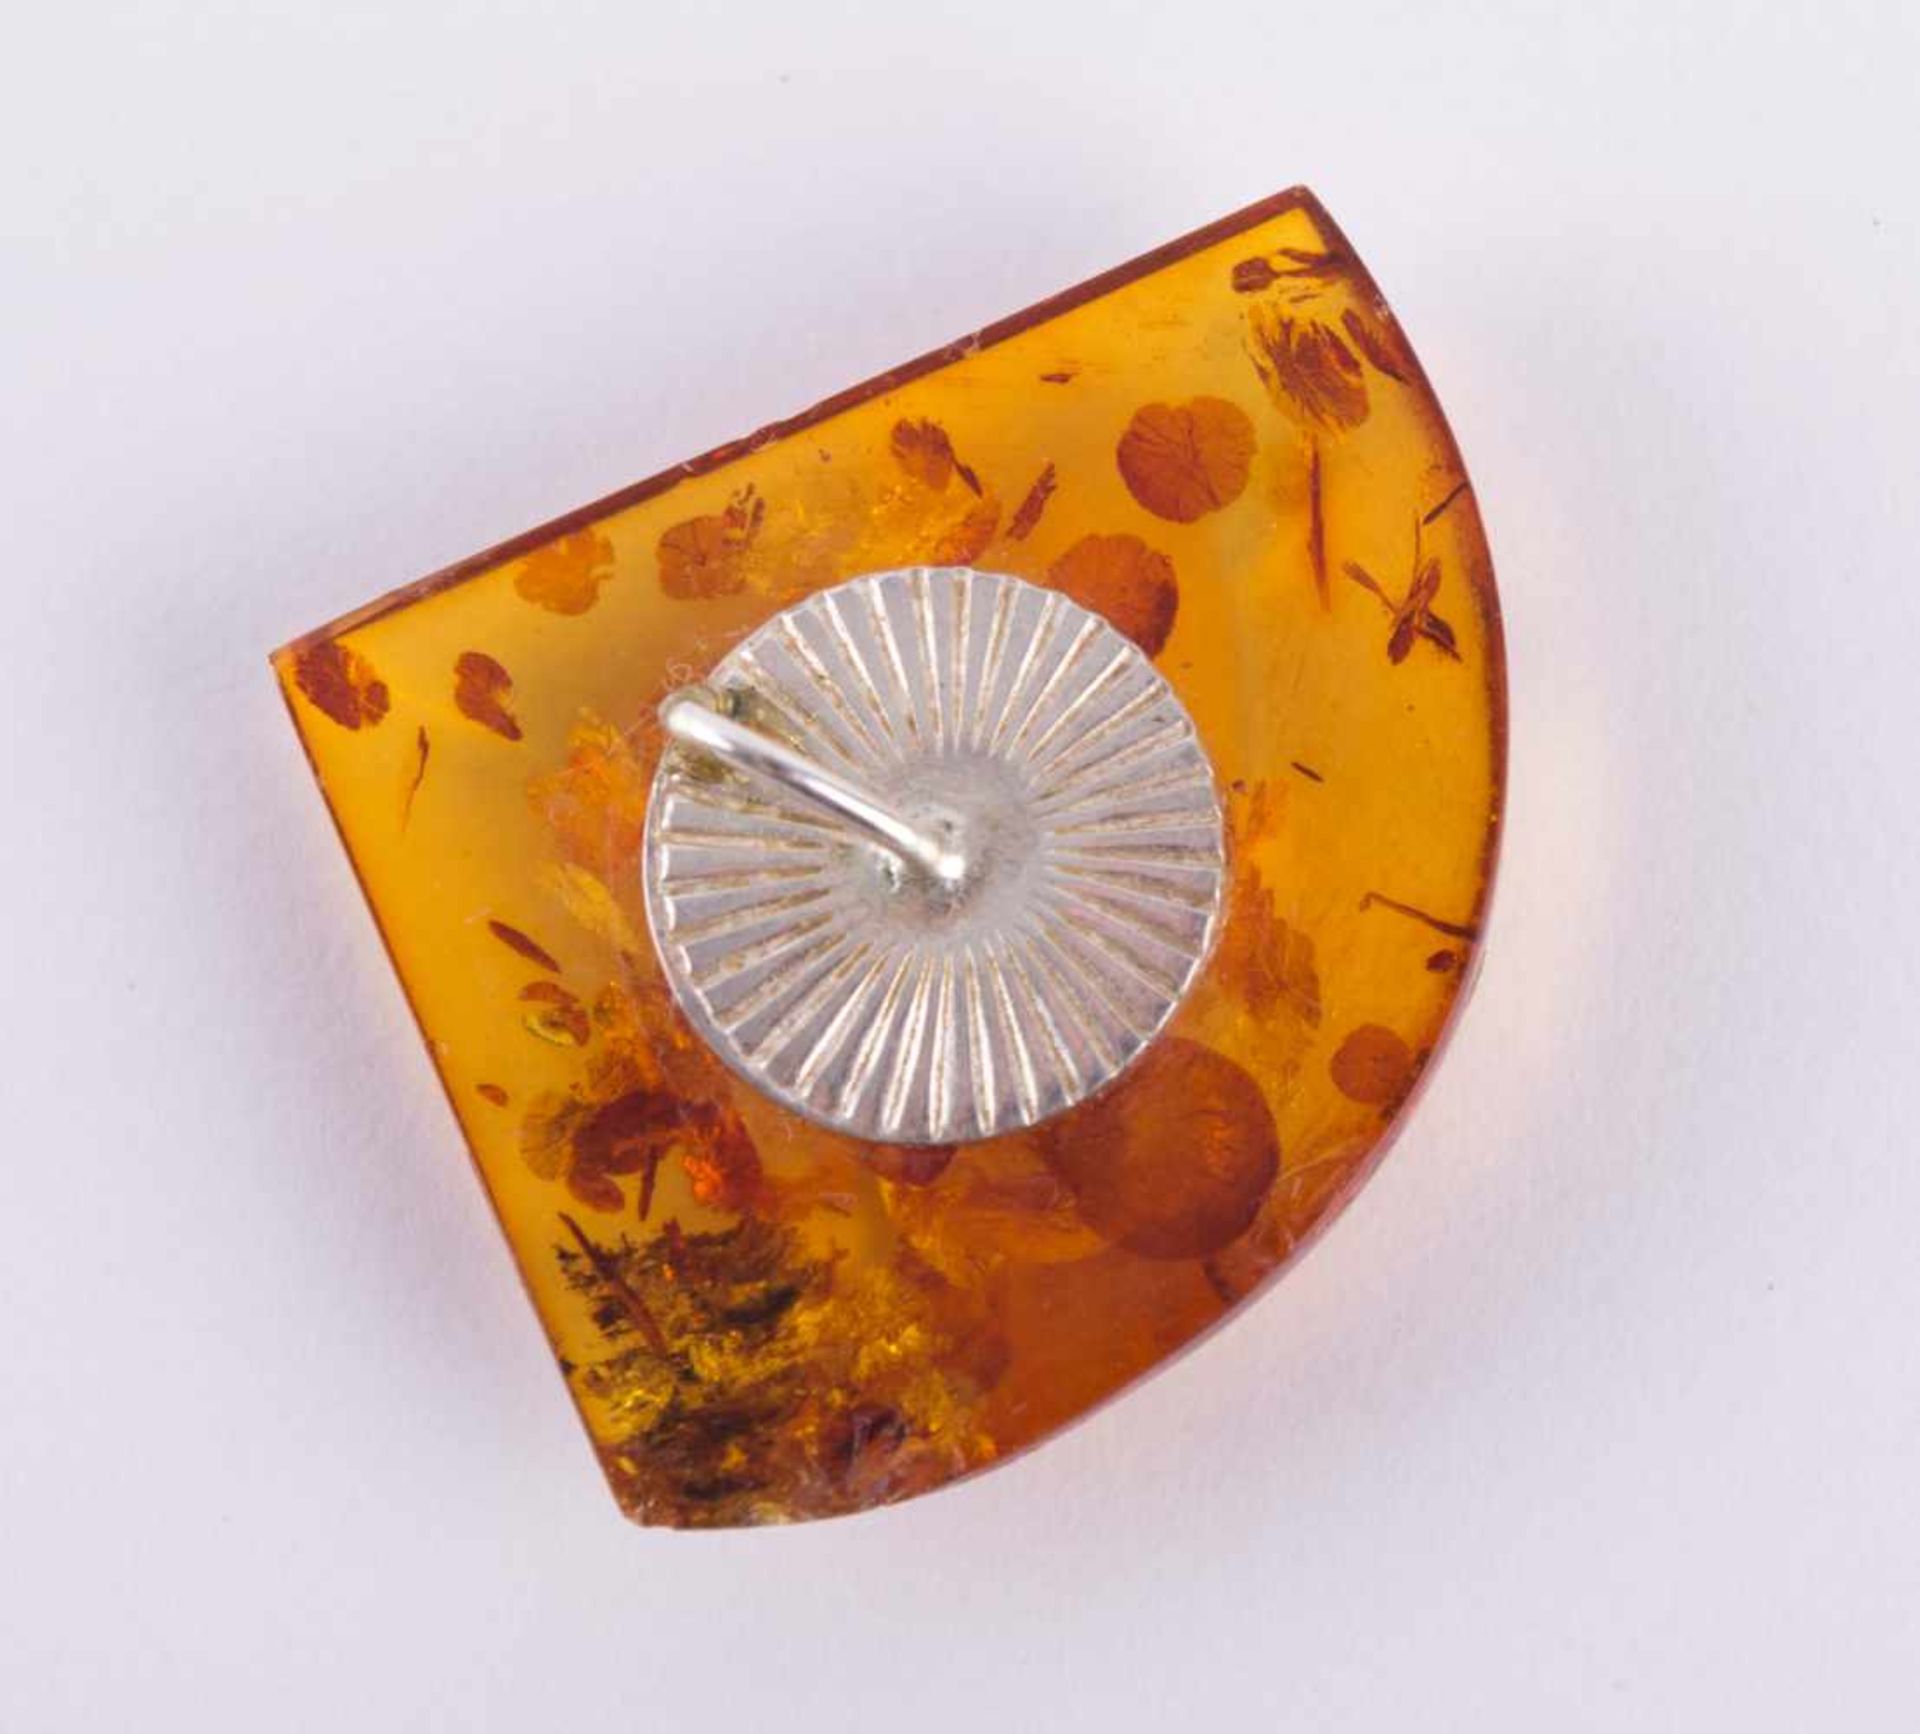 Bernstein Anhänger um 1930/40 25 mm x 22 mm x 7 mm amber pendant about 1930/40 dimensions: 25 mm x - Image 3 of 3